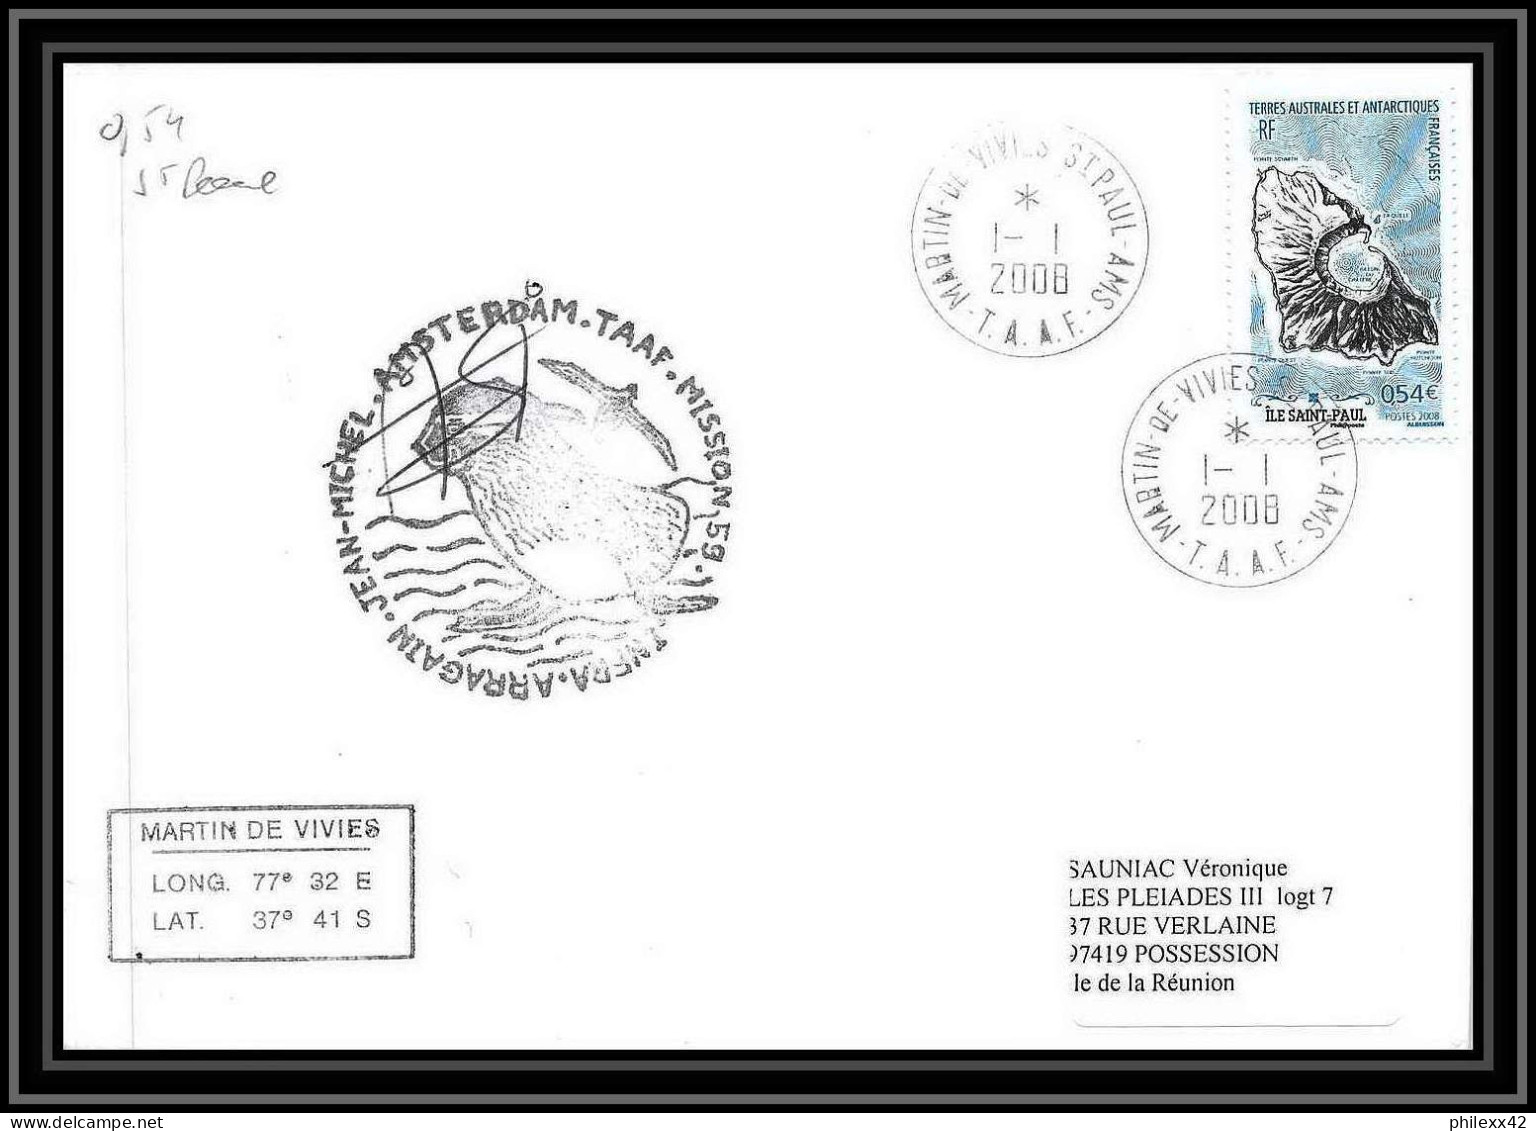 2765 ANTARCTIC Terres Australes TAAF Lettre Cover Dufresne 2 Signé Signed ST PAUL N°506 Mission 59 1/1/2008 - Spedizioni Antartiche